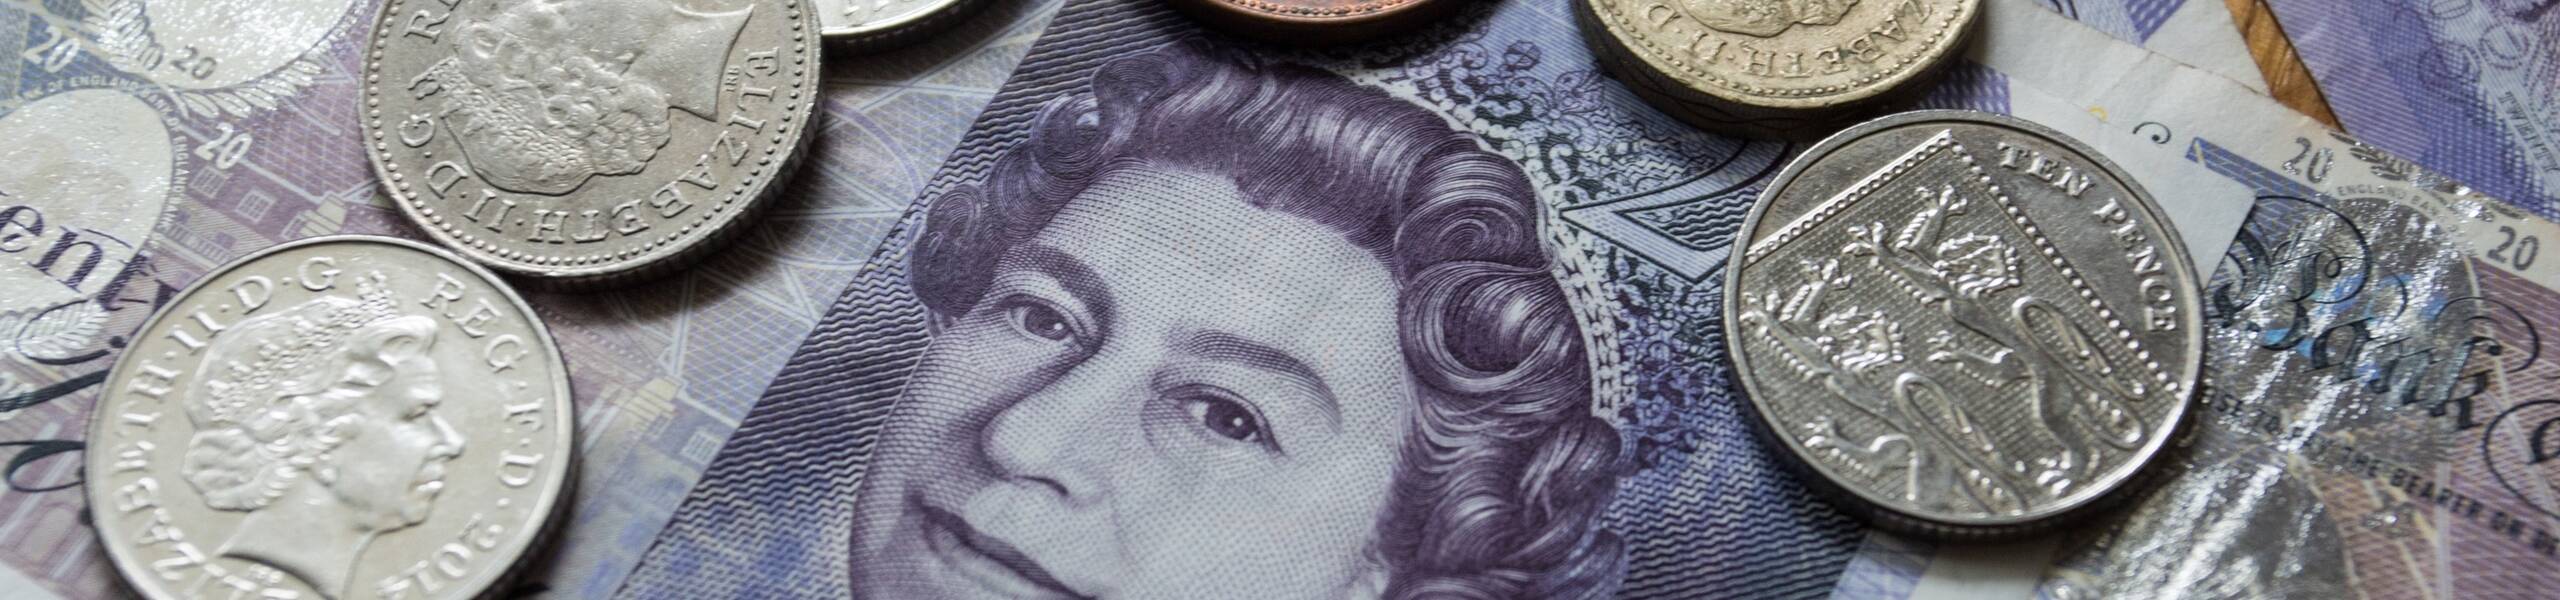 GBP/USD: pair declining since 'Double Top' formed